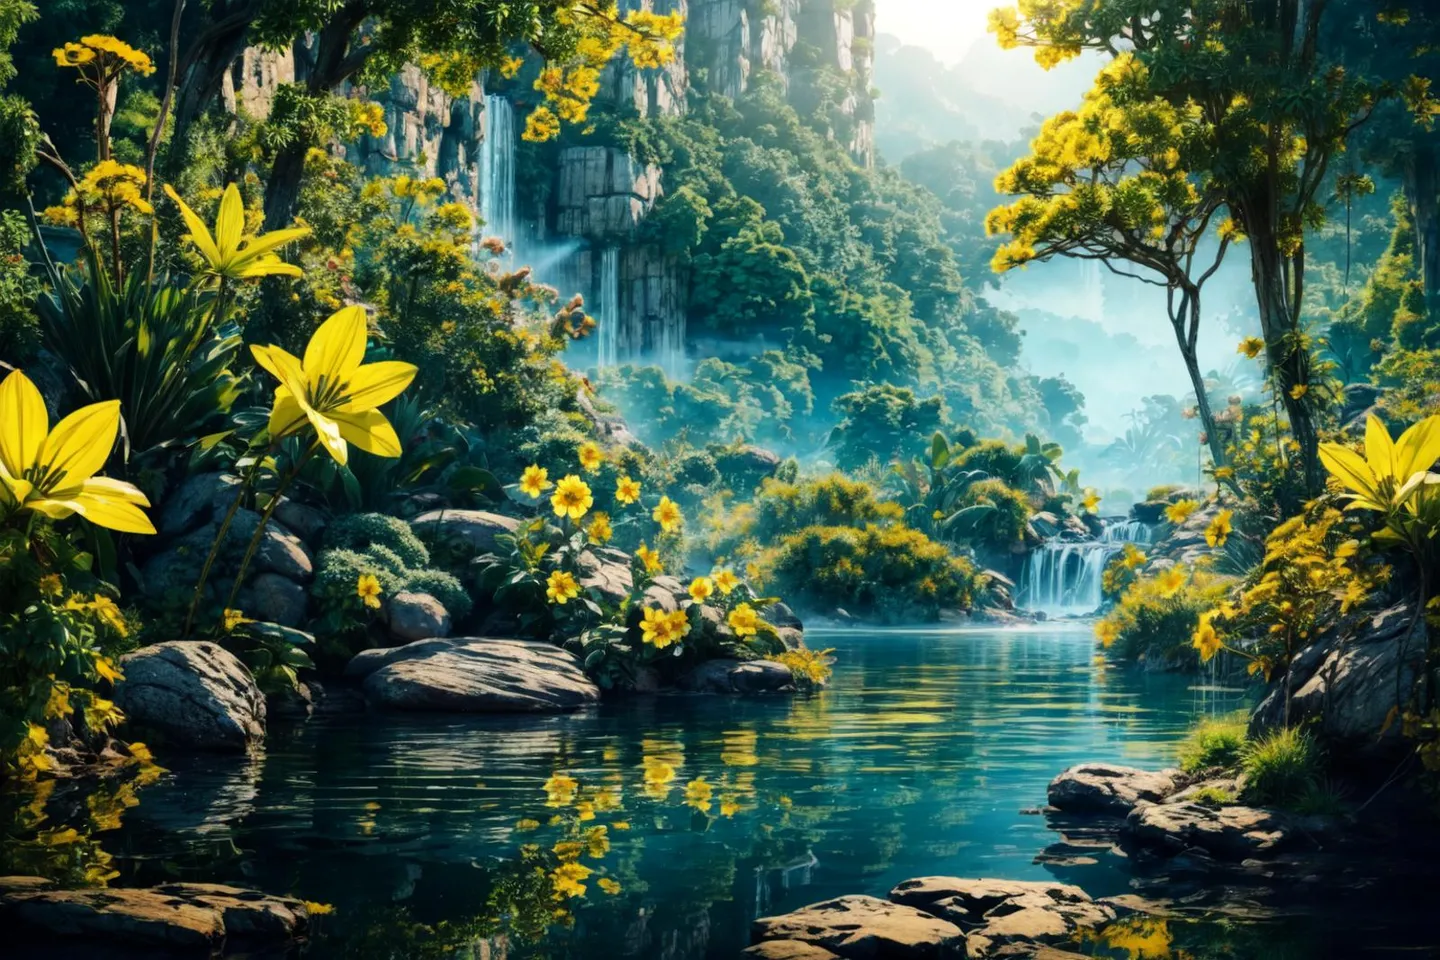 Fantasy landscape with yellow flowers, rocks, water, trees, and waterfalls, AI generated using Stable Diffusion.